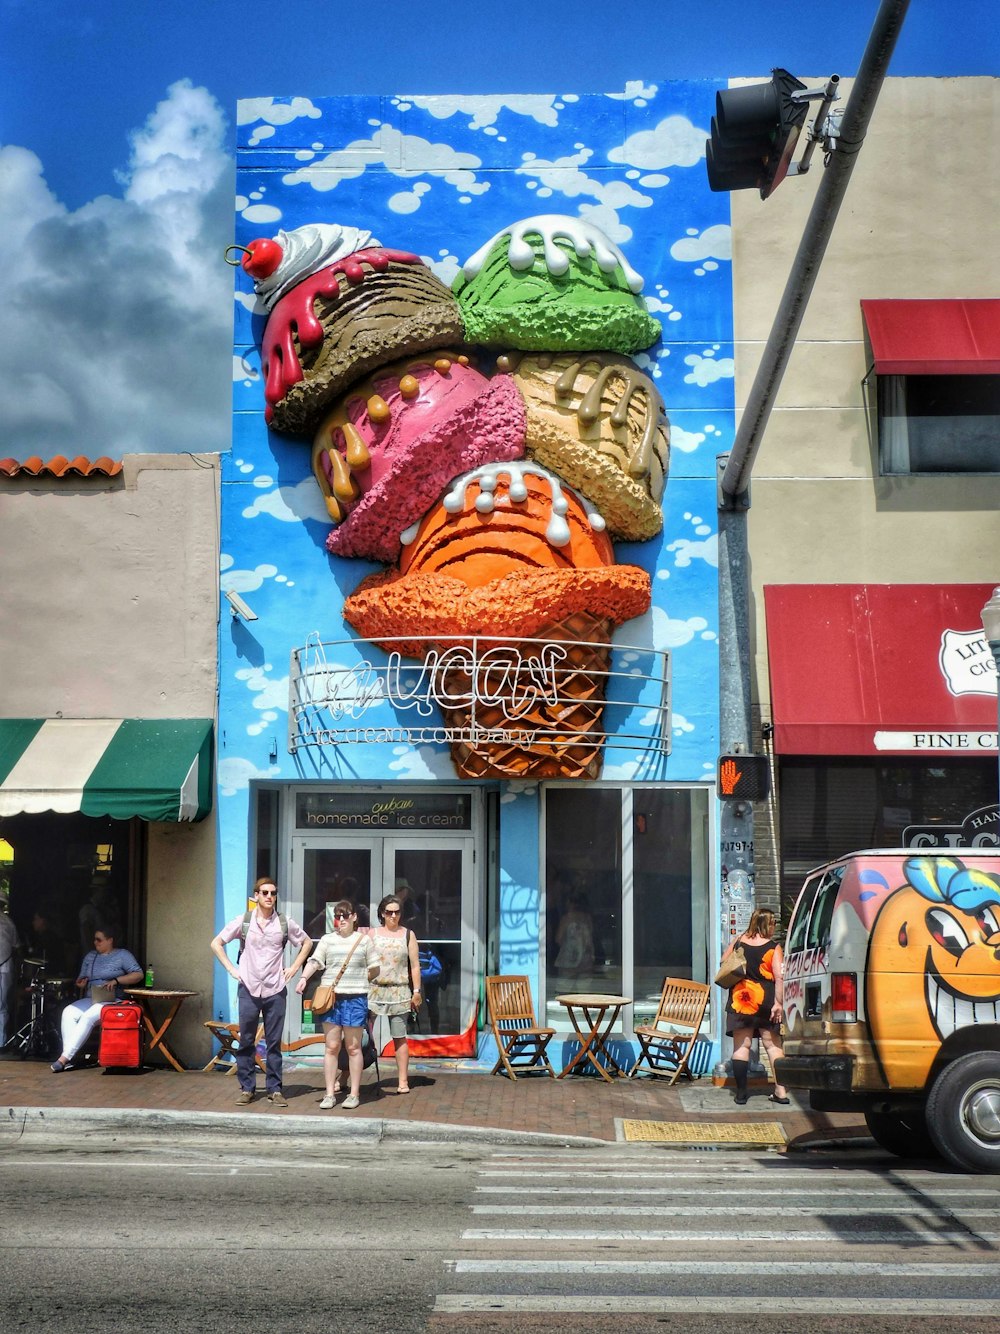 a large ice cream cone on the side of a building